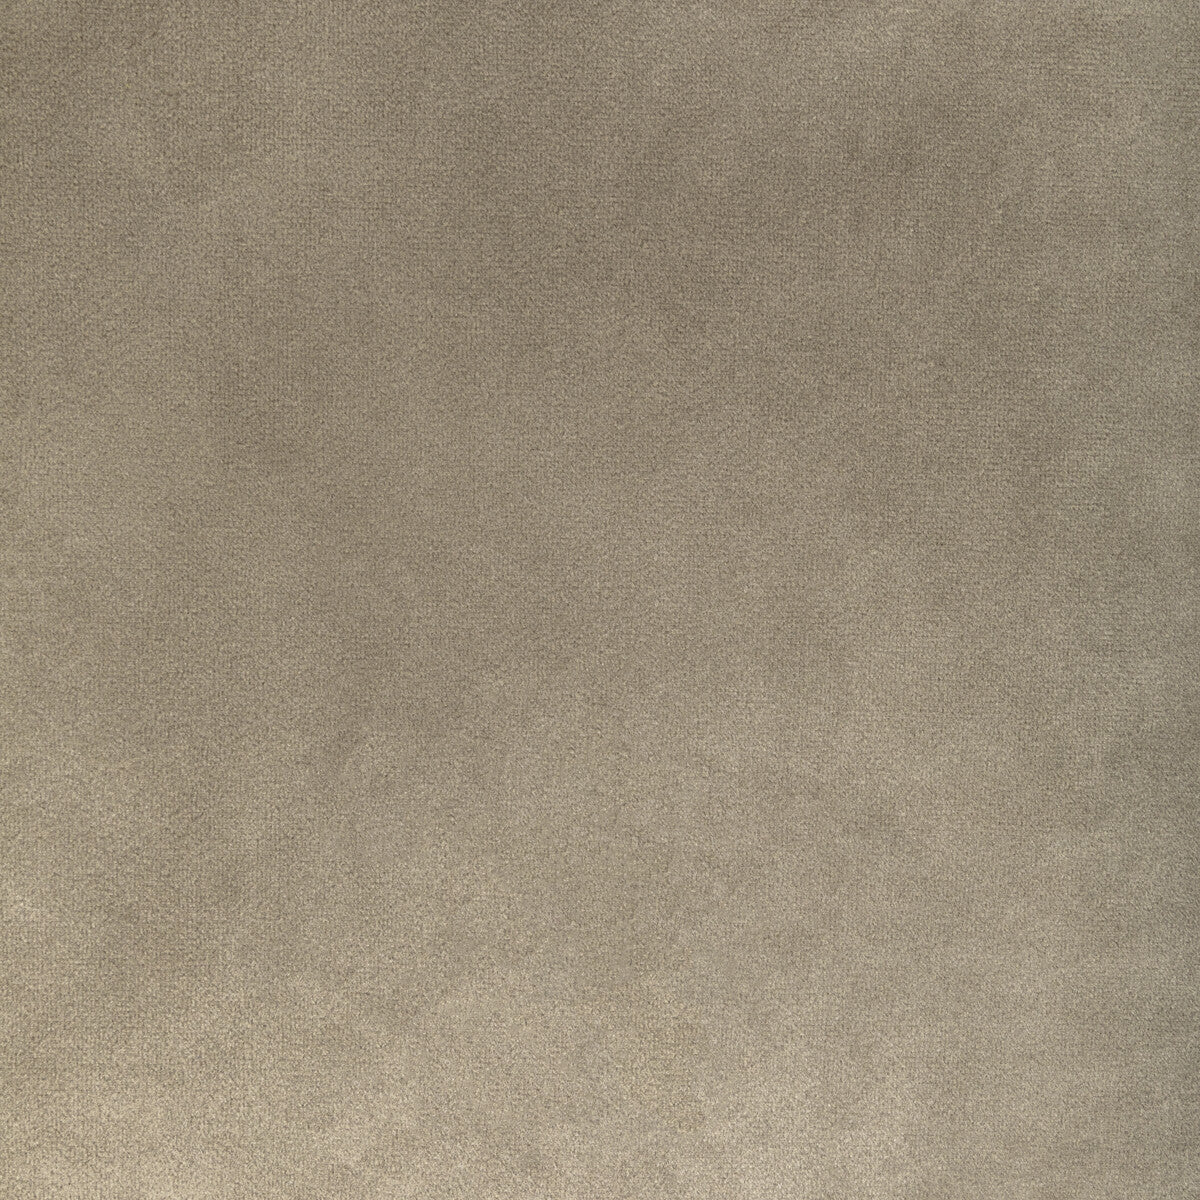 Rocco Velvet fabric in stone color - pattern KW-10065.3685MG8.0 - by Kravet Contract